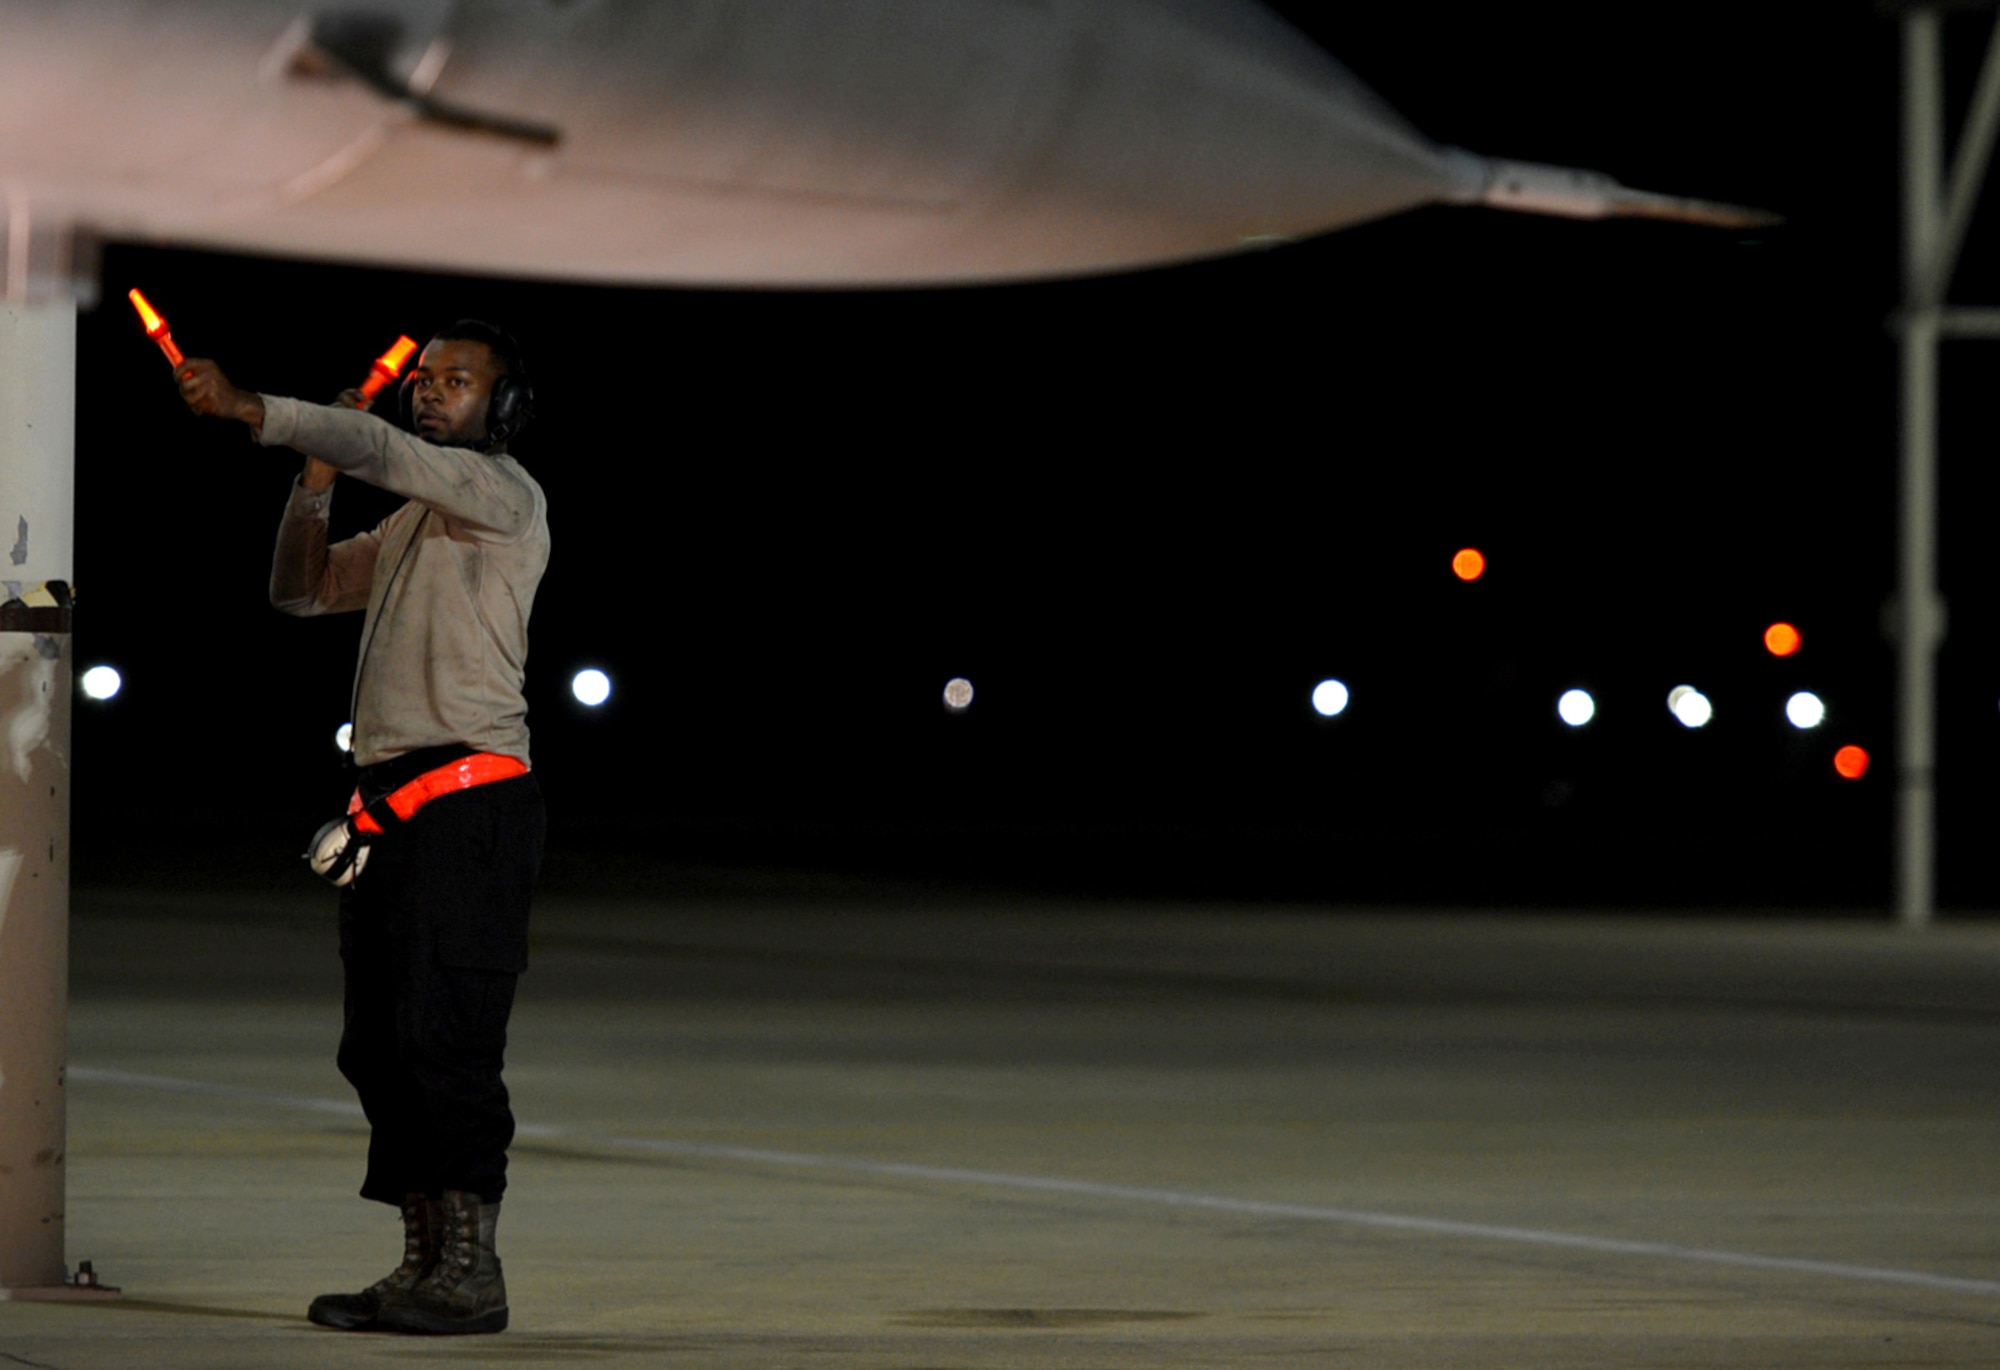 U.S. Airmen assigned to the 77th Fighter Squadron deployed to an undisclosed location in Southwest Asia in support of Operation Freedom's Sentinel.